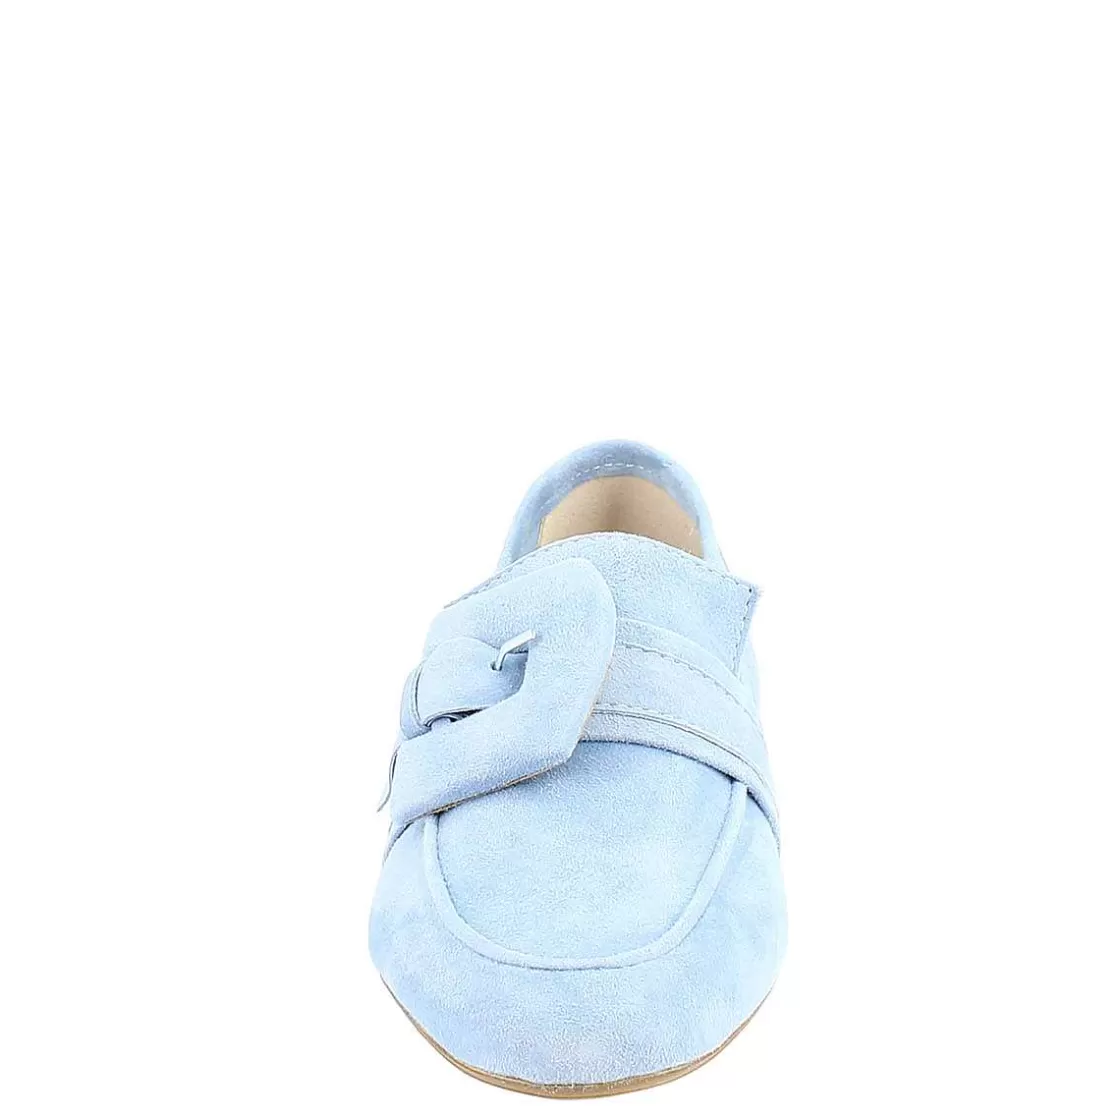 Leonardo Women'S Moccasin In Light Blue Suede With Wrapped Buckle. Outlet